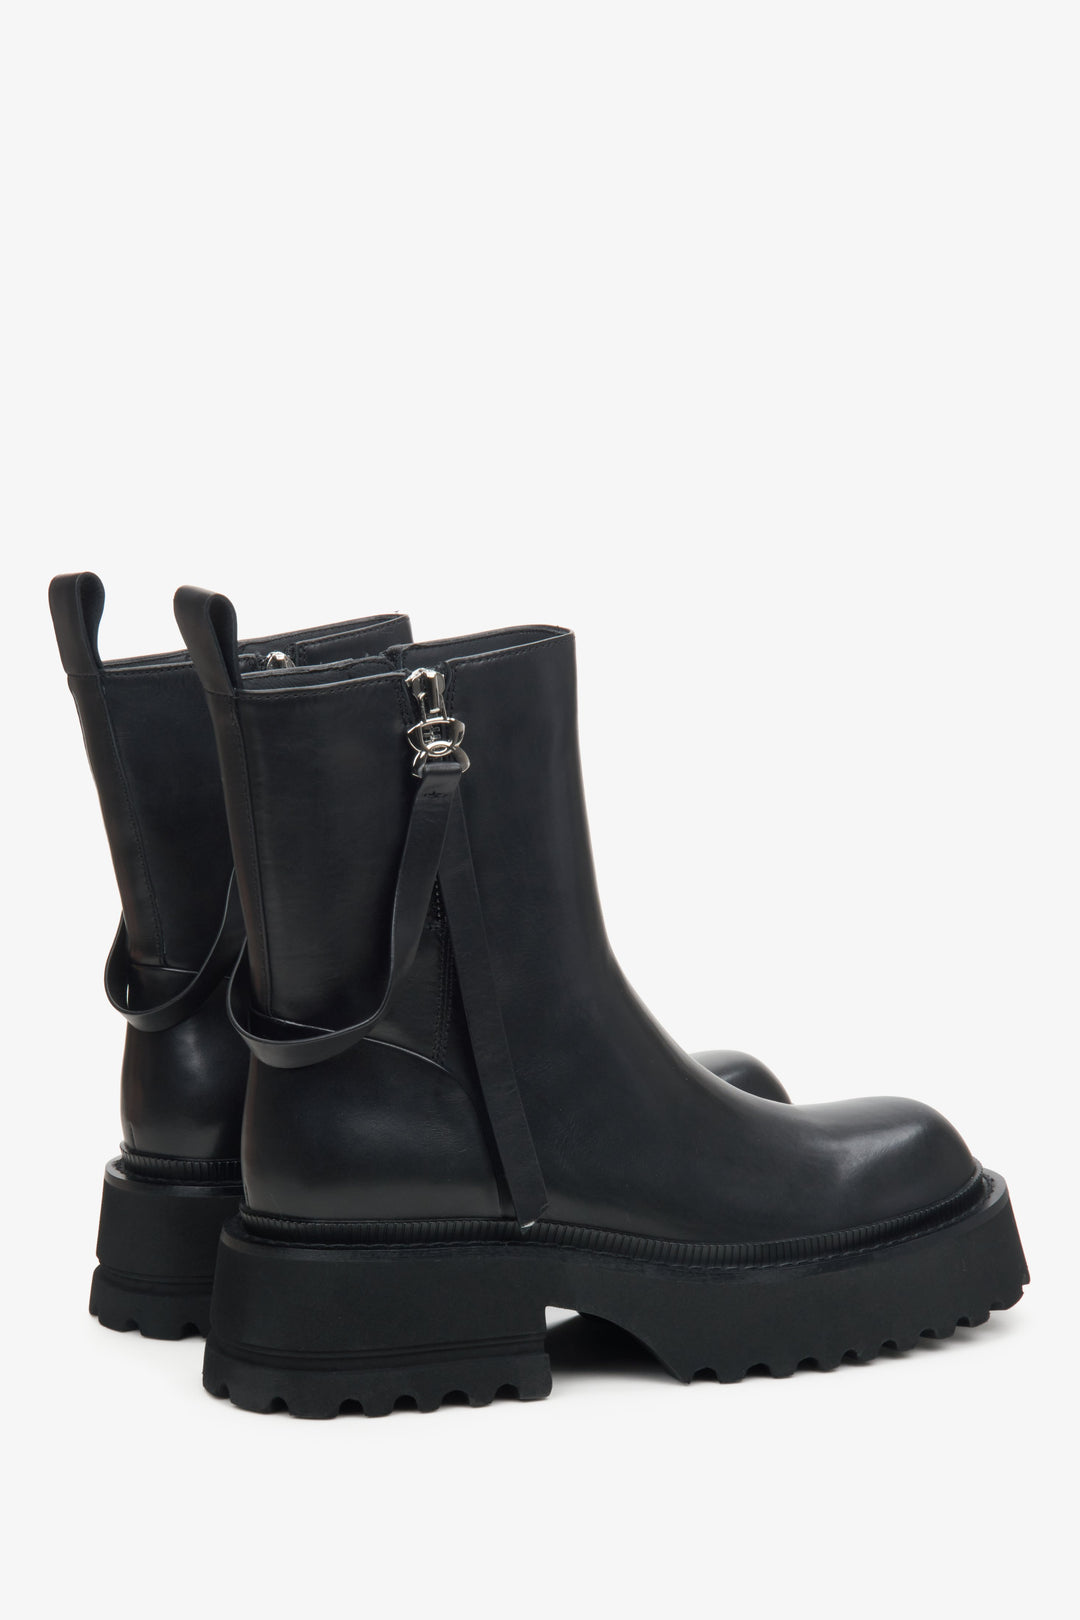 Women's black boots made of genuine leather by Estro - close-up on the side line of the shoe.